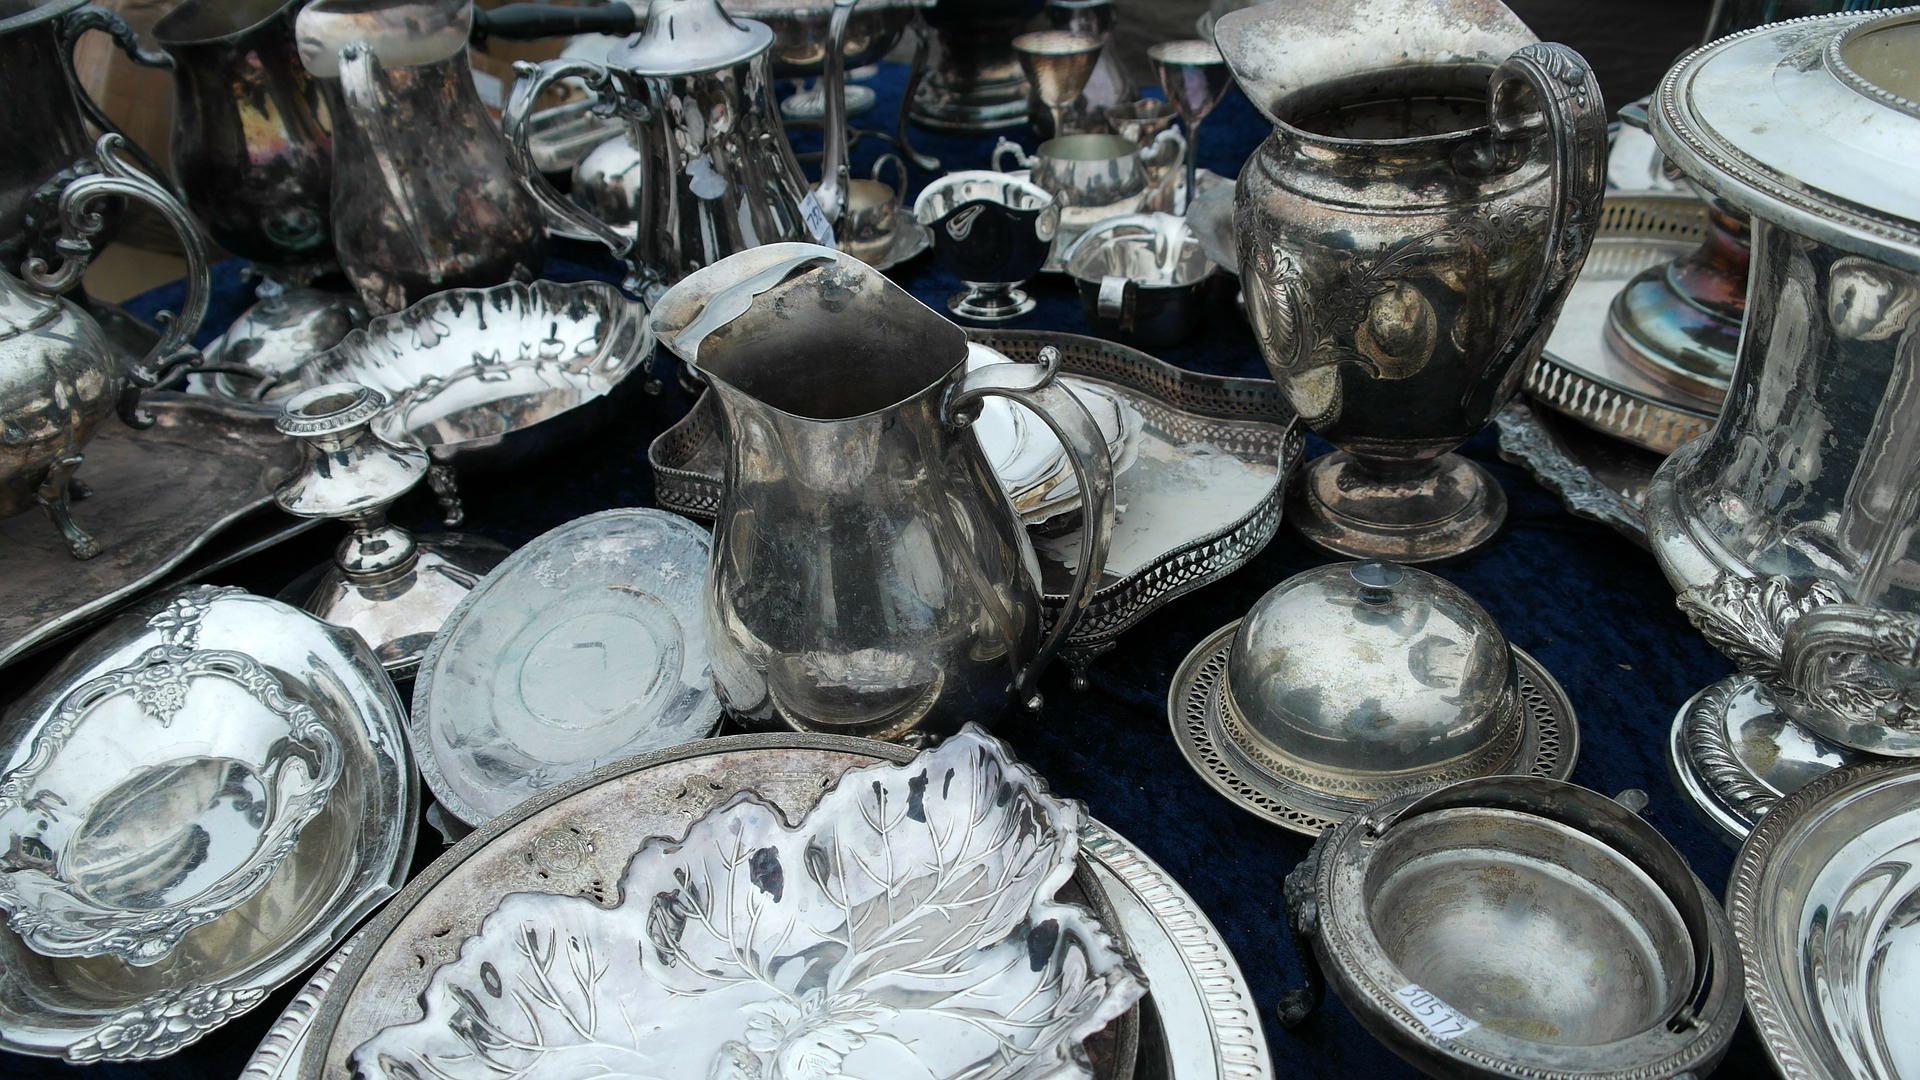 Arizona's 8 Most Awaited and Highly Anticipated Flea Markets for 2016